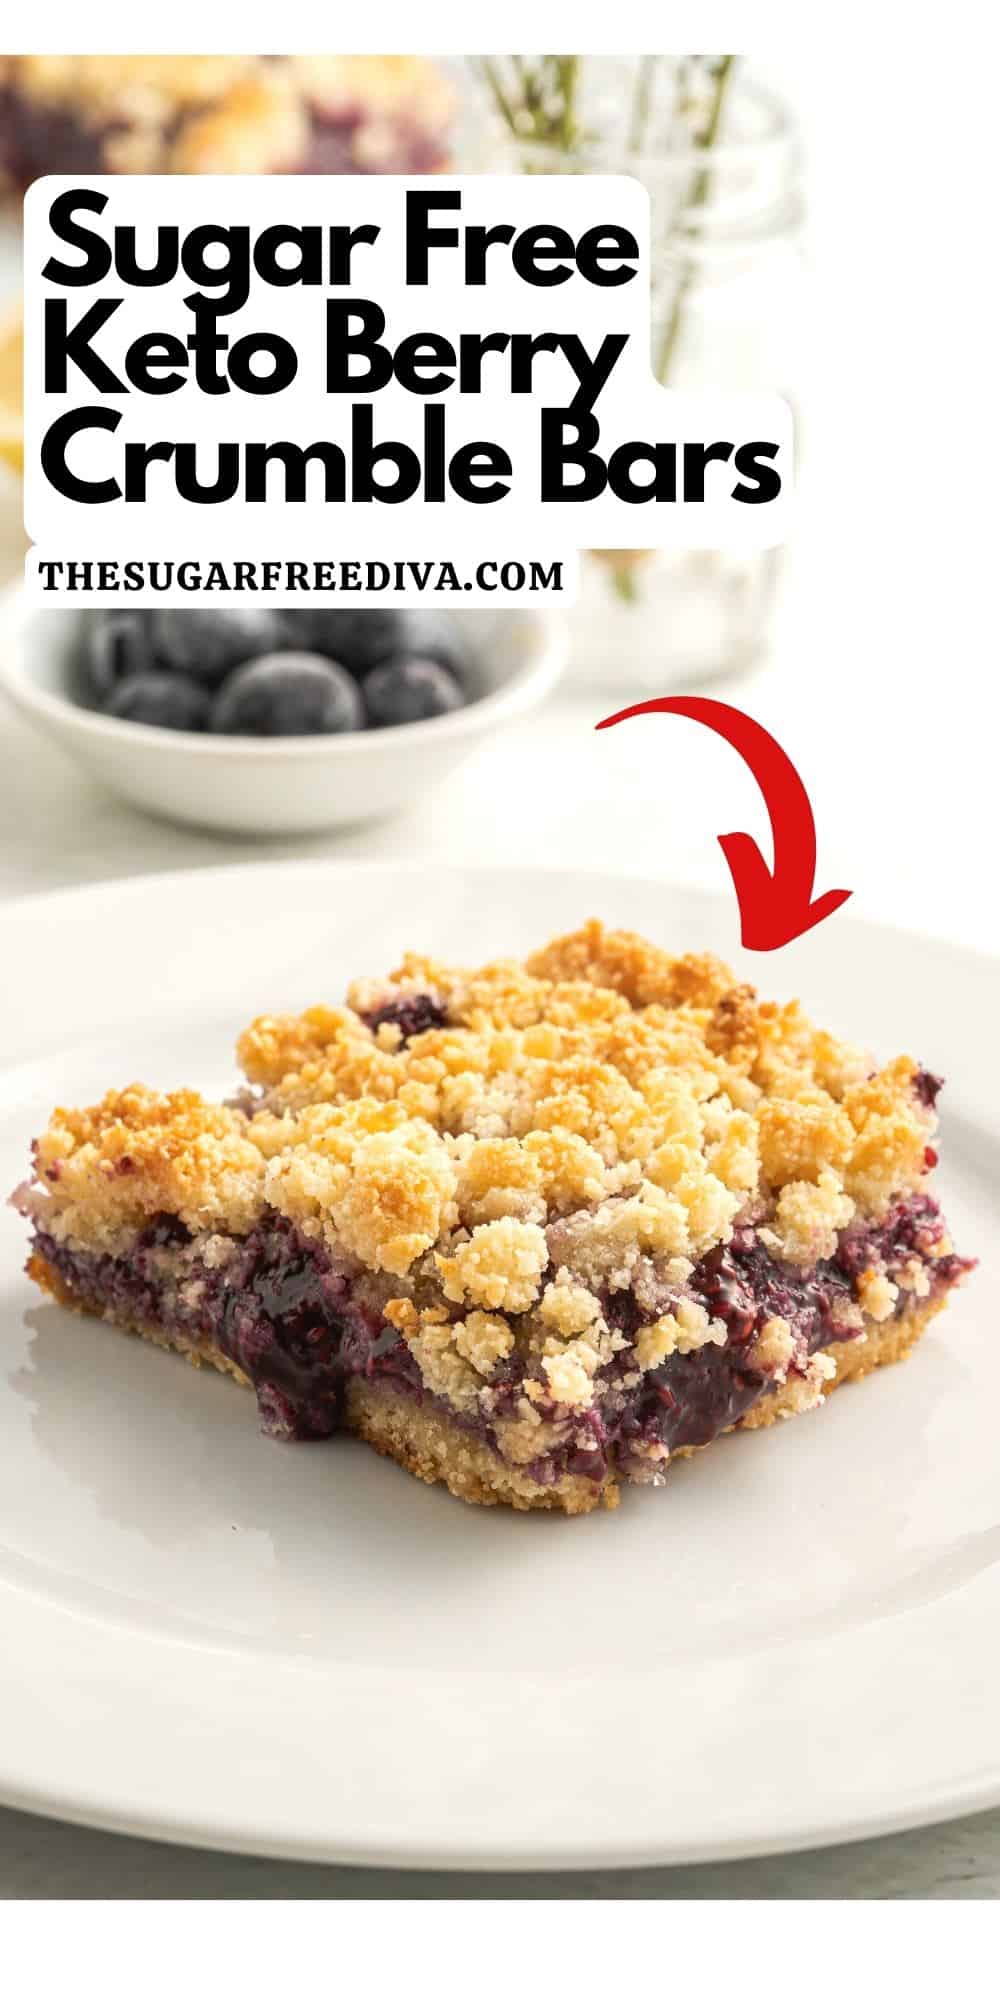 Sugar Free Keto Berry Crumble Bars, a delicious dessert recipe made with fresh berries and a crumble topping. Keto and gluten free diet.